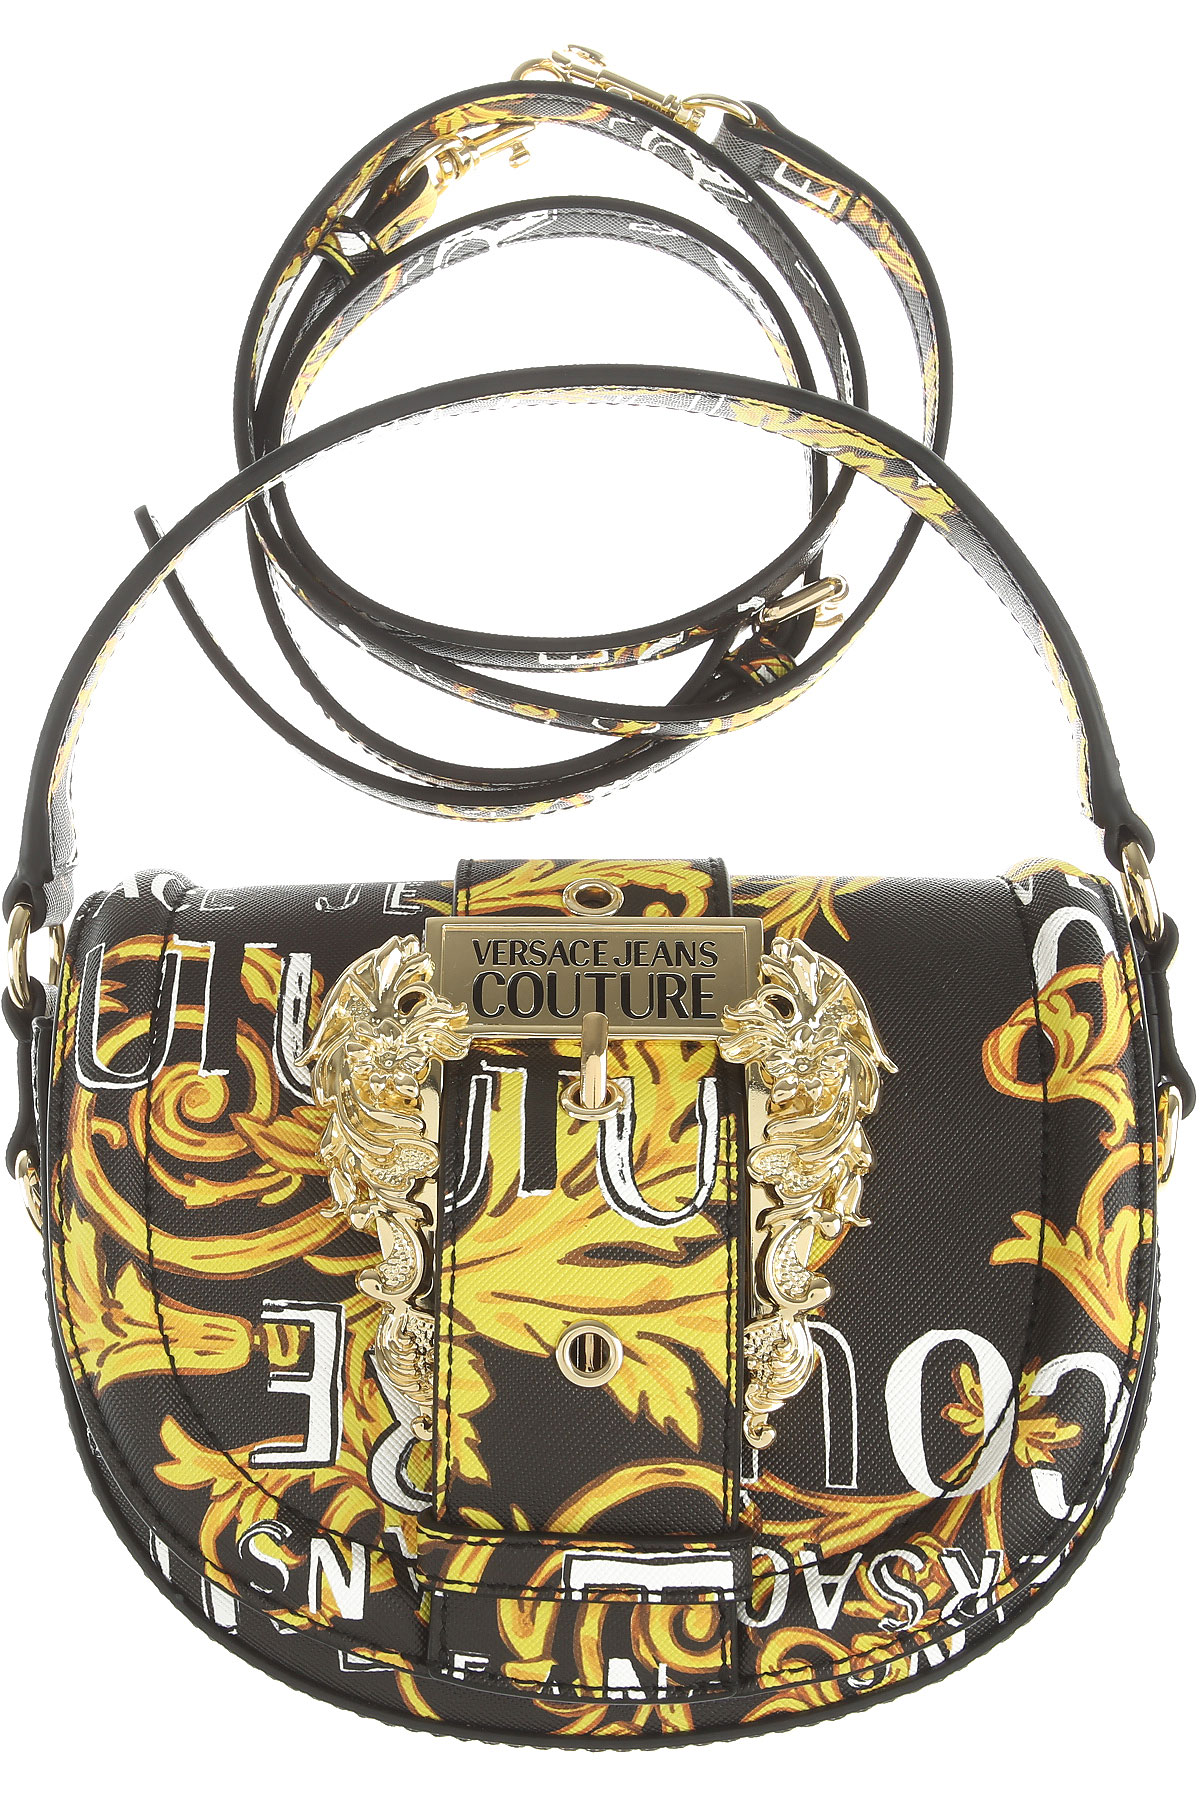 VERSACE 4 Colours Fancy Delicate Women'S Hand Bags, 399gms, Size: Free at  Rs 649/piece in Surat